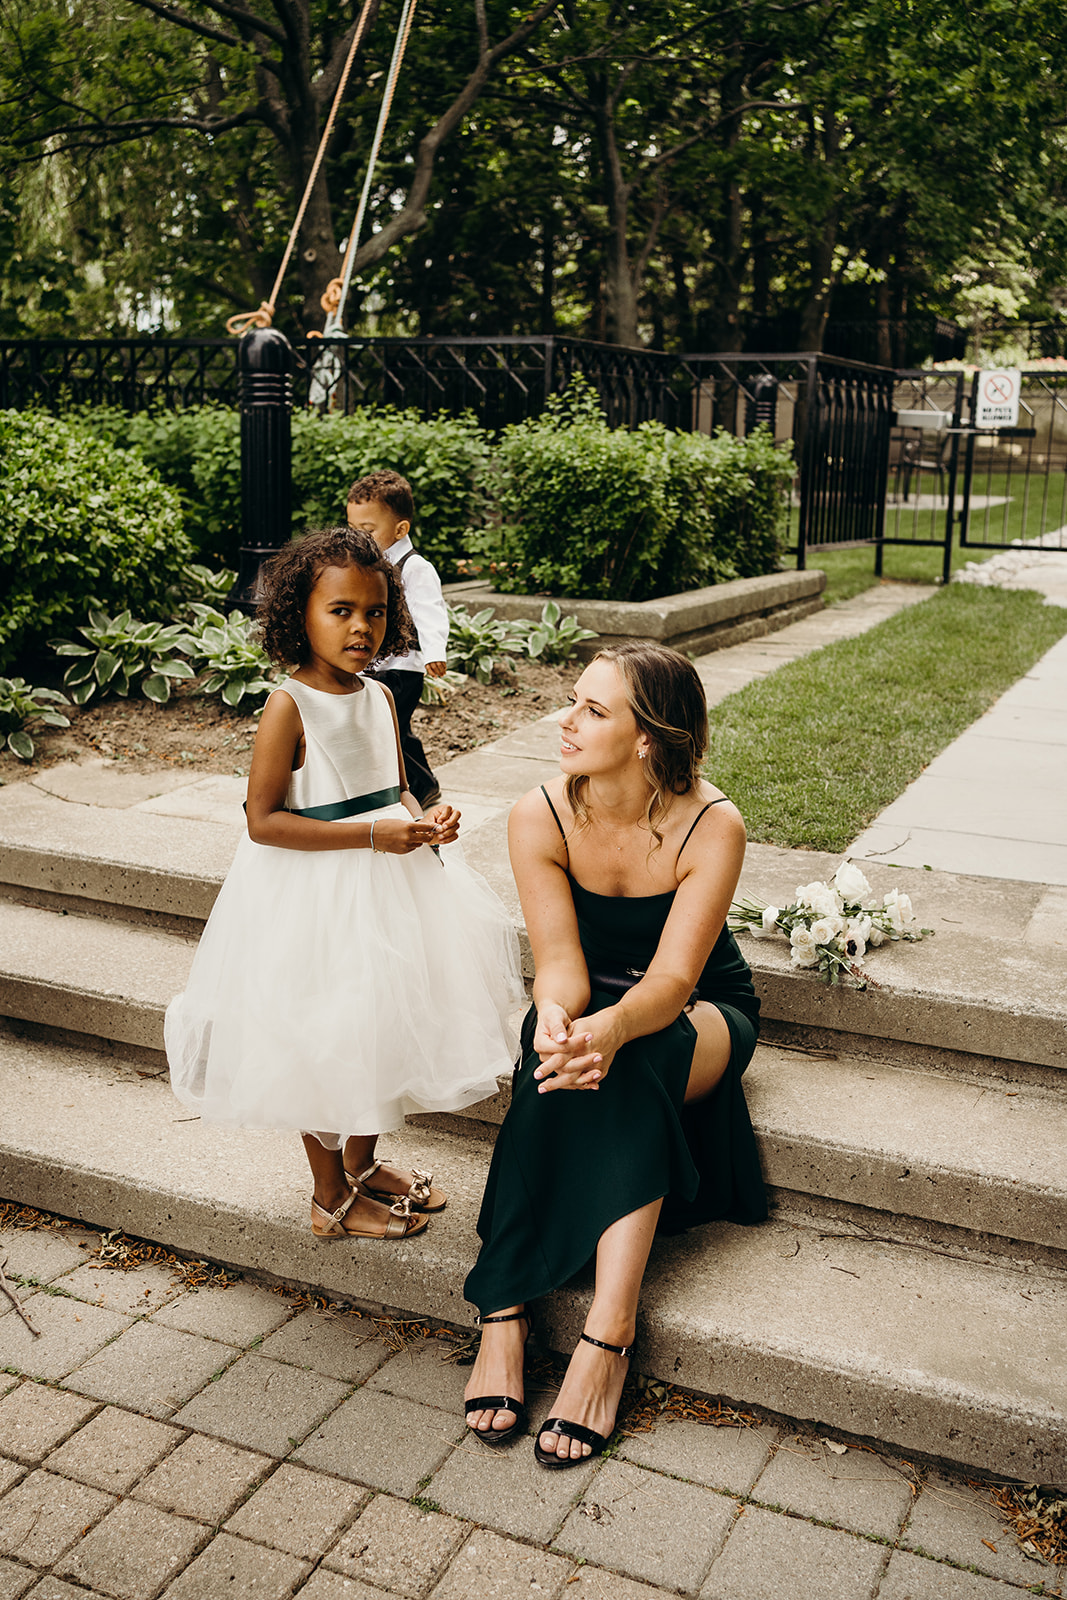 A lady talking to a child standing in a white dress.